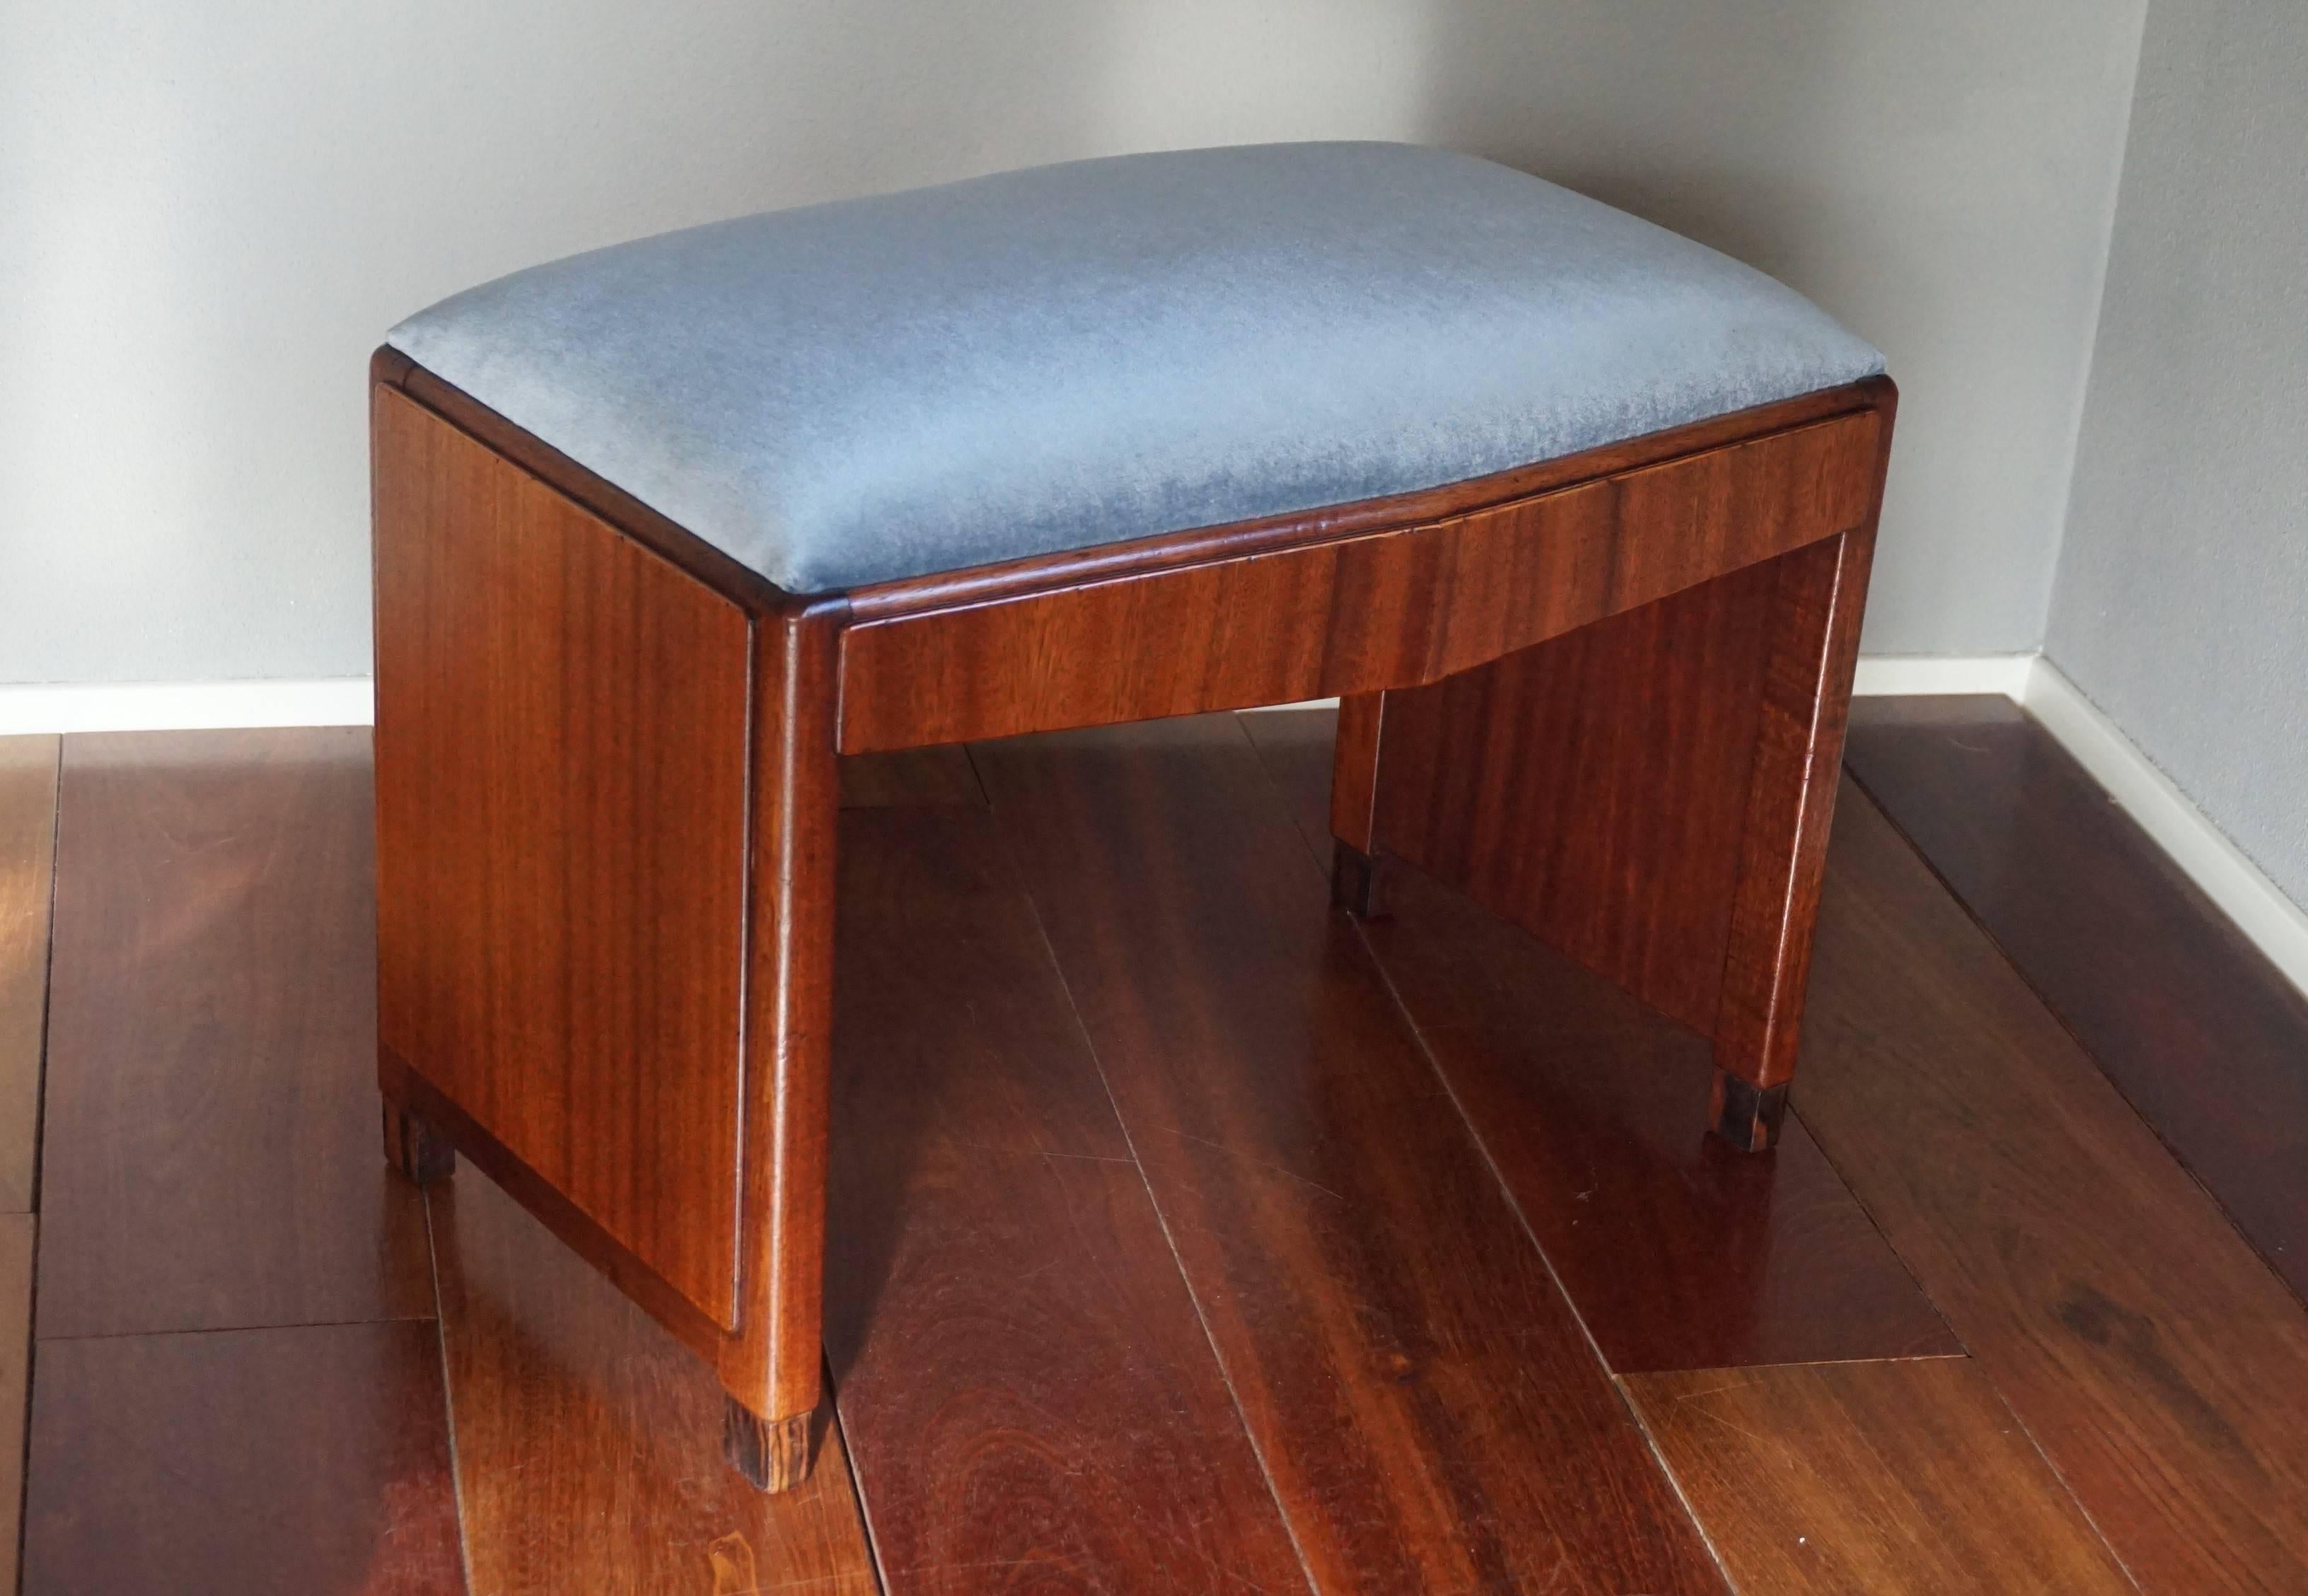 Wonderful shape and condition, 1920s Art Deco bench.

This perfectly symmetrical and straight lined stool is in amazingly good condition and it is as stabile as the day it was made. The removable seat is neatly upholstered and you could not wish for